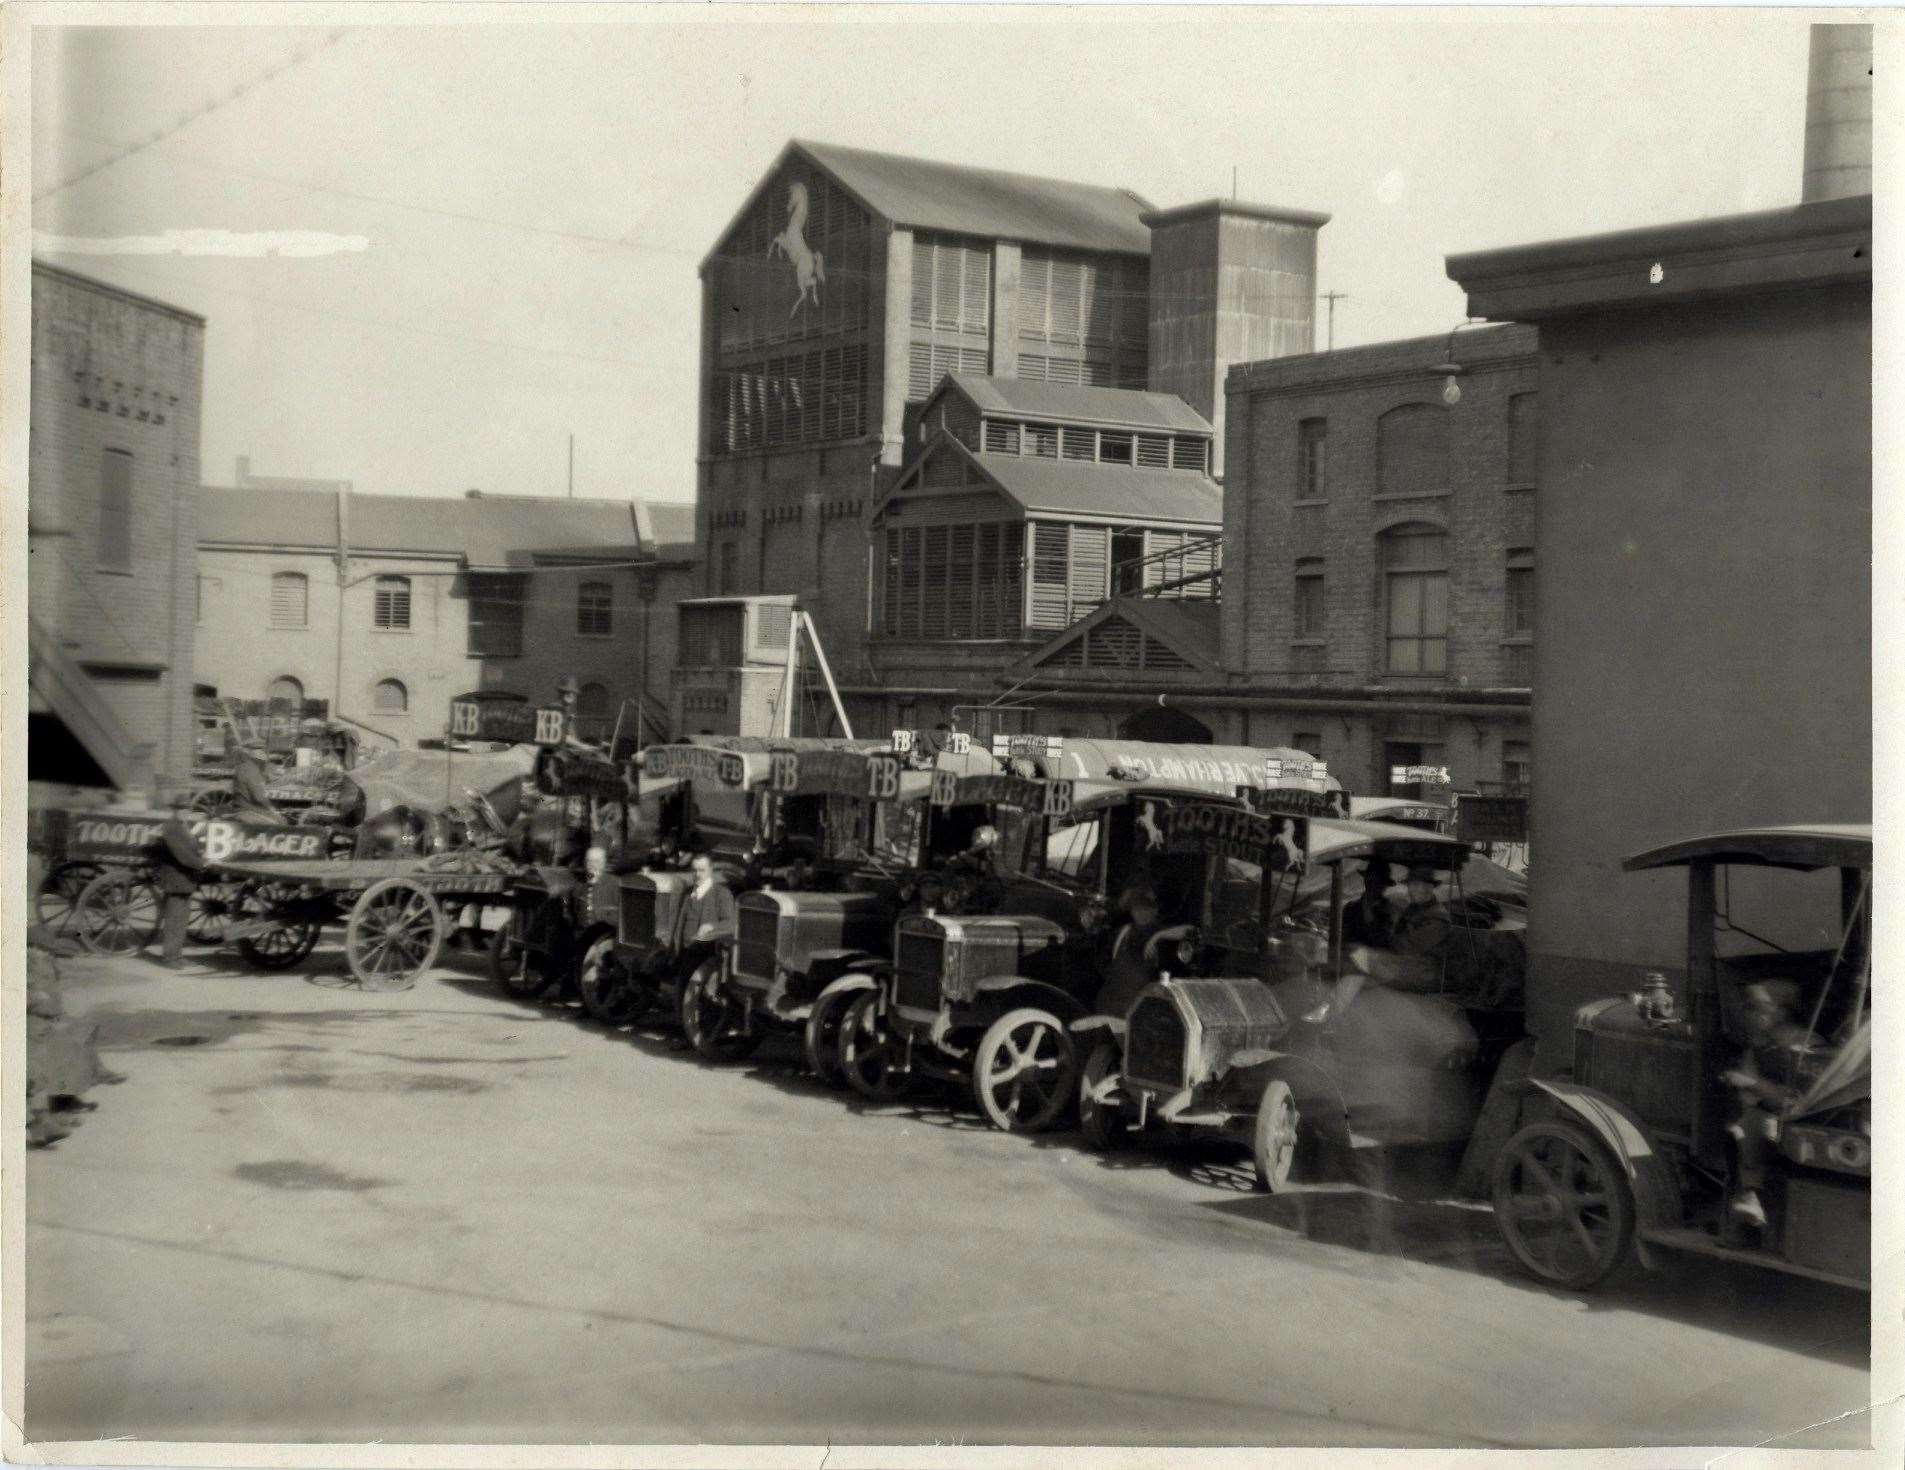 The Kent Brewery in Australia, taken in 1922. Picture from the collection of the Australian National University Archives